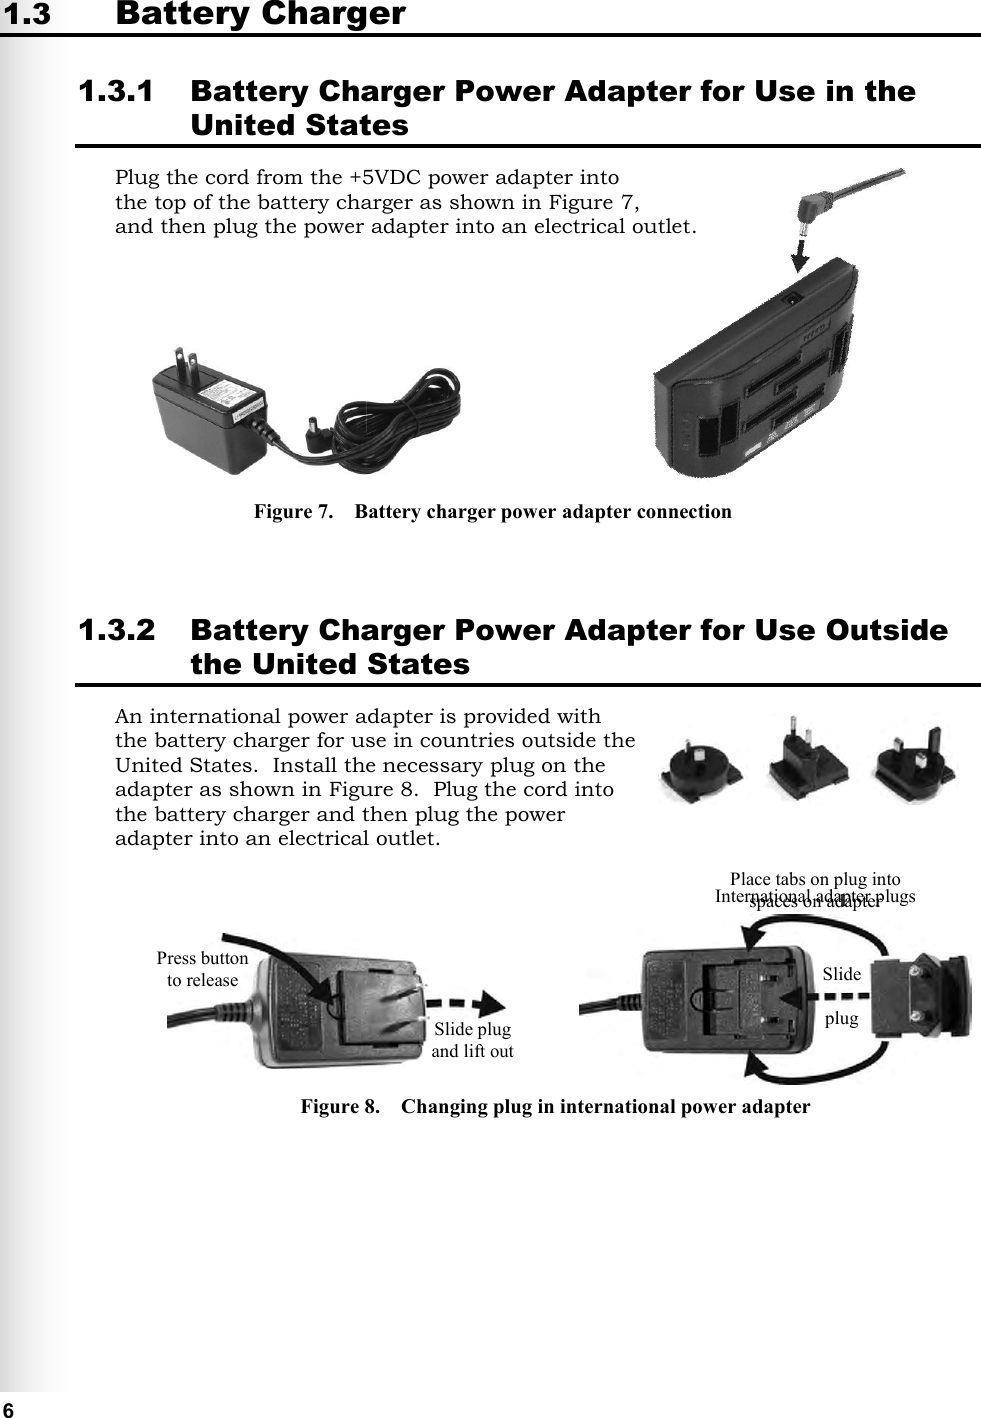   6 1.3 Battery Charger 1.3.1 Battery Charger Power Adapter for Use in the United States Plug the cord from the +5VDC power adapter into  the top of the battery charger as shown in Figure 7,  and then plug the power adapter into an electrical outlet.            1.3.2 Battery Charger Power Adapter for Use Outside the United States An international power adapter is provided with the battery charger for use in countries outside the United States.  Install the necessary plug on the adapter as shown in Figure 8.  Plug the cord into the battery charger and then plug the power adapter into an electrical outlet.               Slide plug and lift out Press button to release Place tabs on plug into spaces on adapter Slide  plug International adapter plugs Figure 7.    Battery charger power adapter connection Figure 8.    Changing plug in international power adapter 